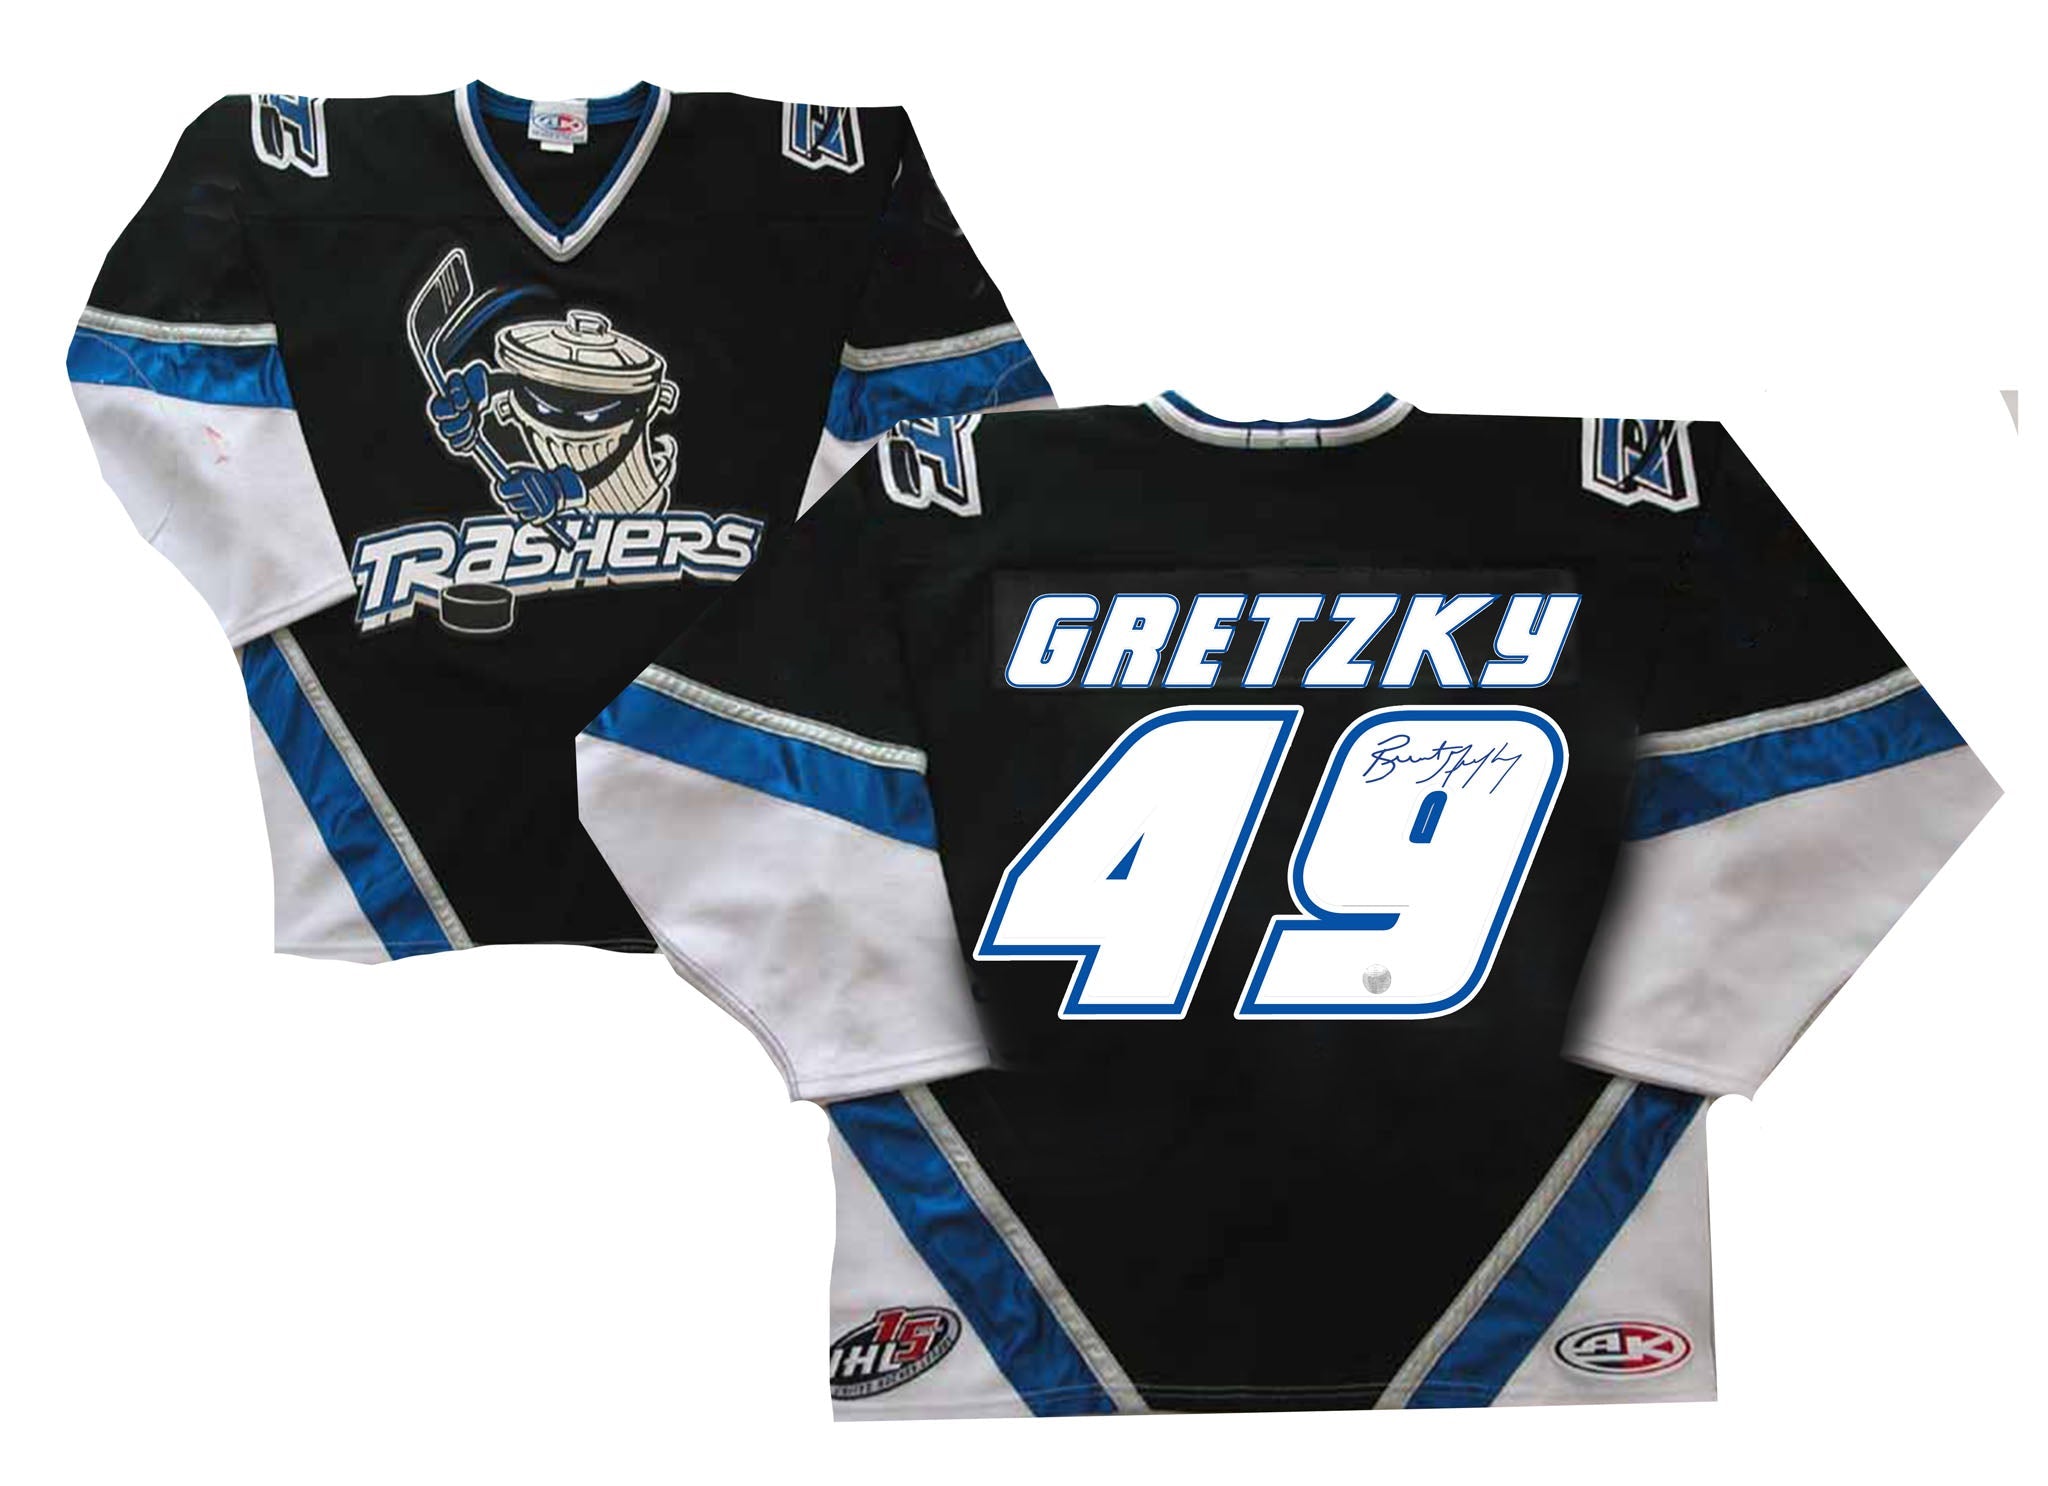 Athletic Knit on X: If you haven't heard of the Danbury Trashers before,  just ask Drake. If you wanted to know who made their jerseys… just ask us!  @dbtrashers are one of